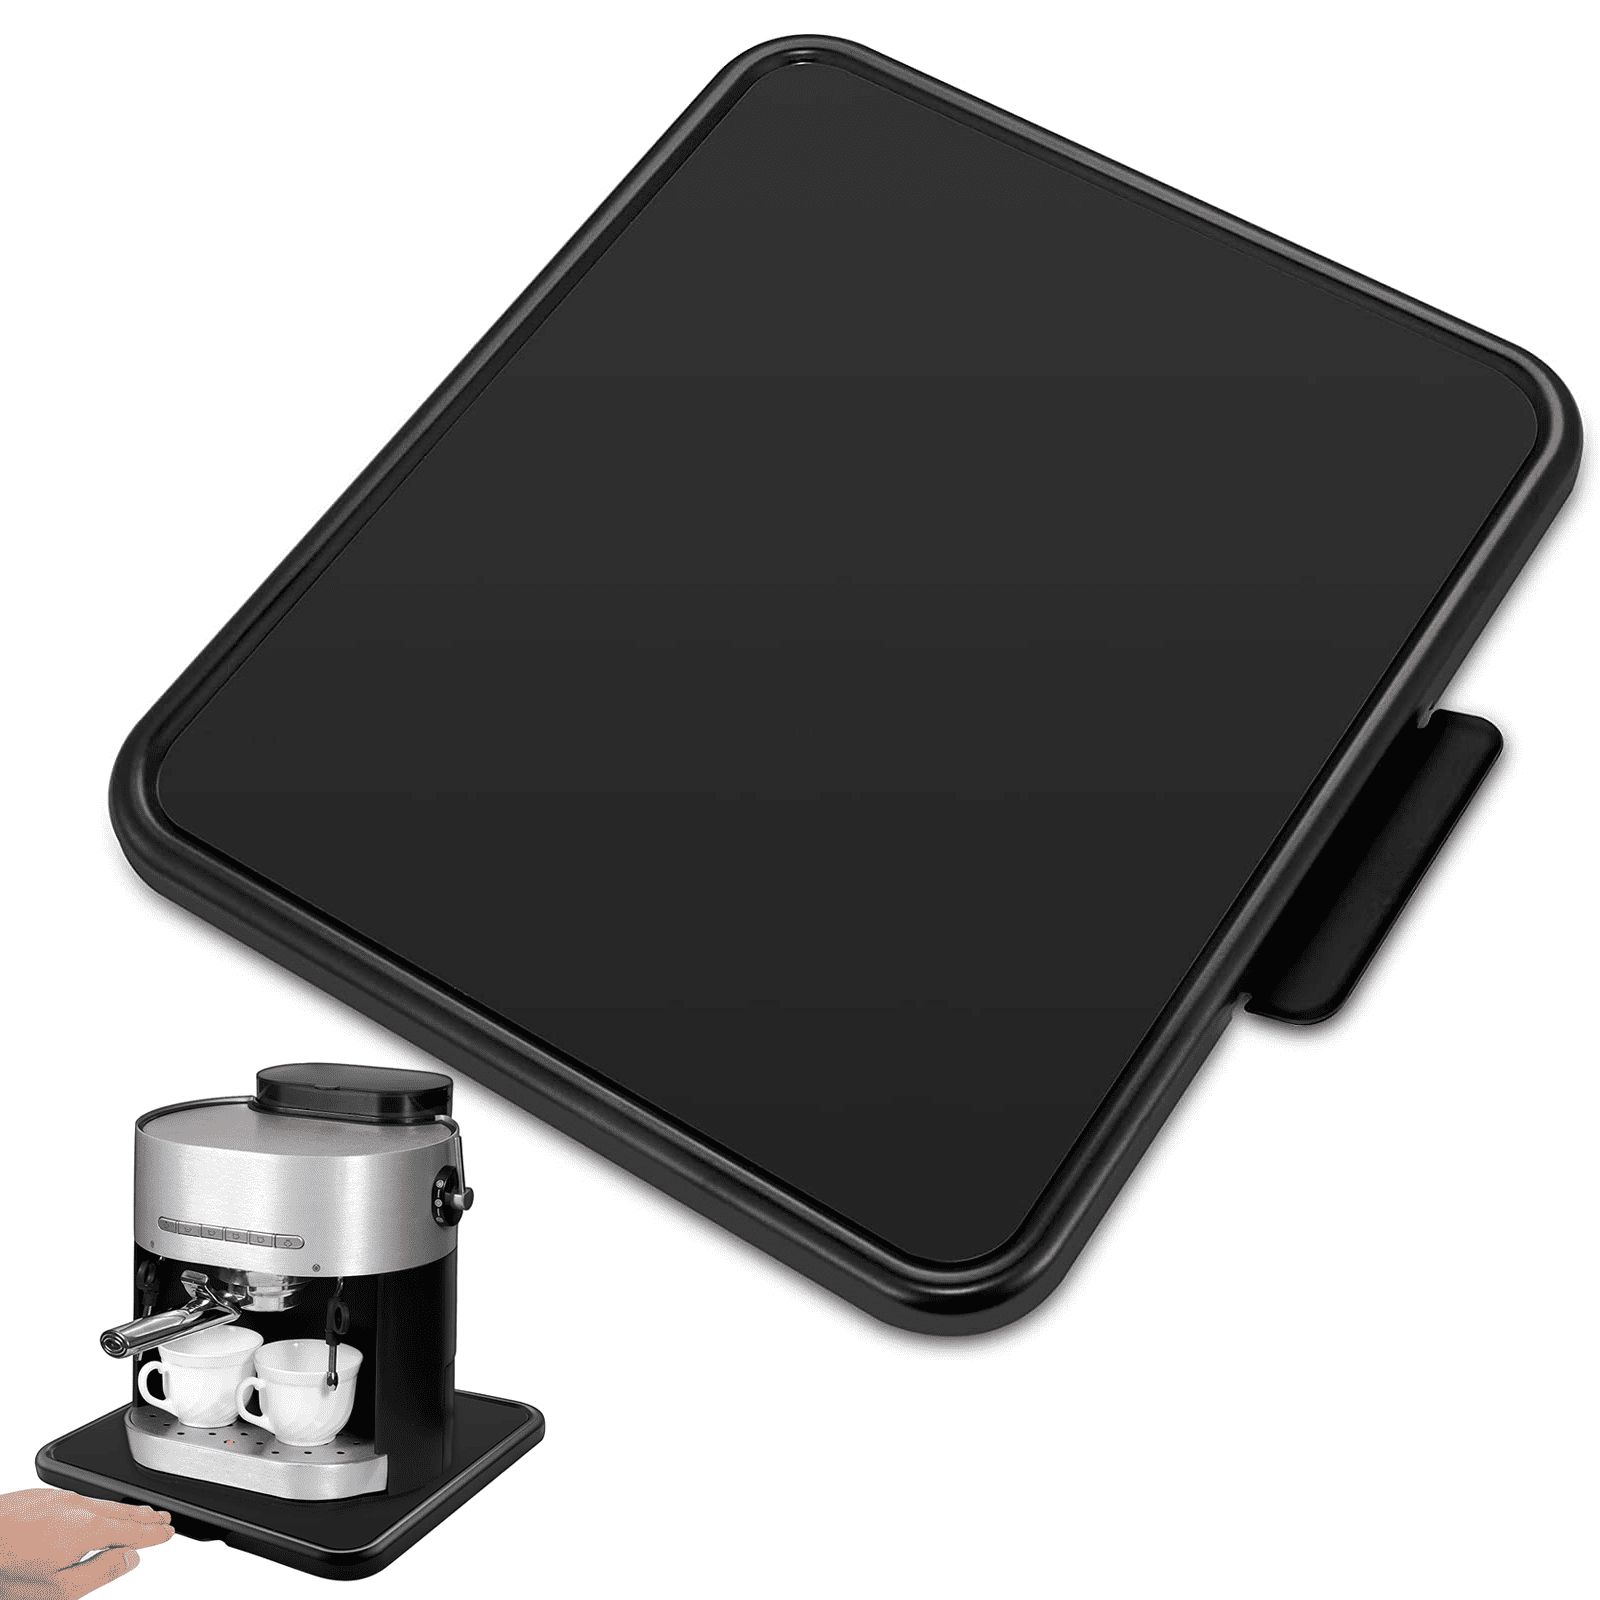  Kitchen Caddy Sliding Tray, Appliance Coffee Maker Slider Large  Rolling Tray Under Cabinet Countertop Storage Moving Sliders for Stand  Mixer Air Fryer Toaster Blender with Wheels (13.8'' W × 11.7''D): Home